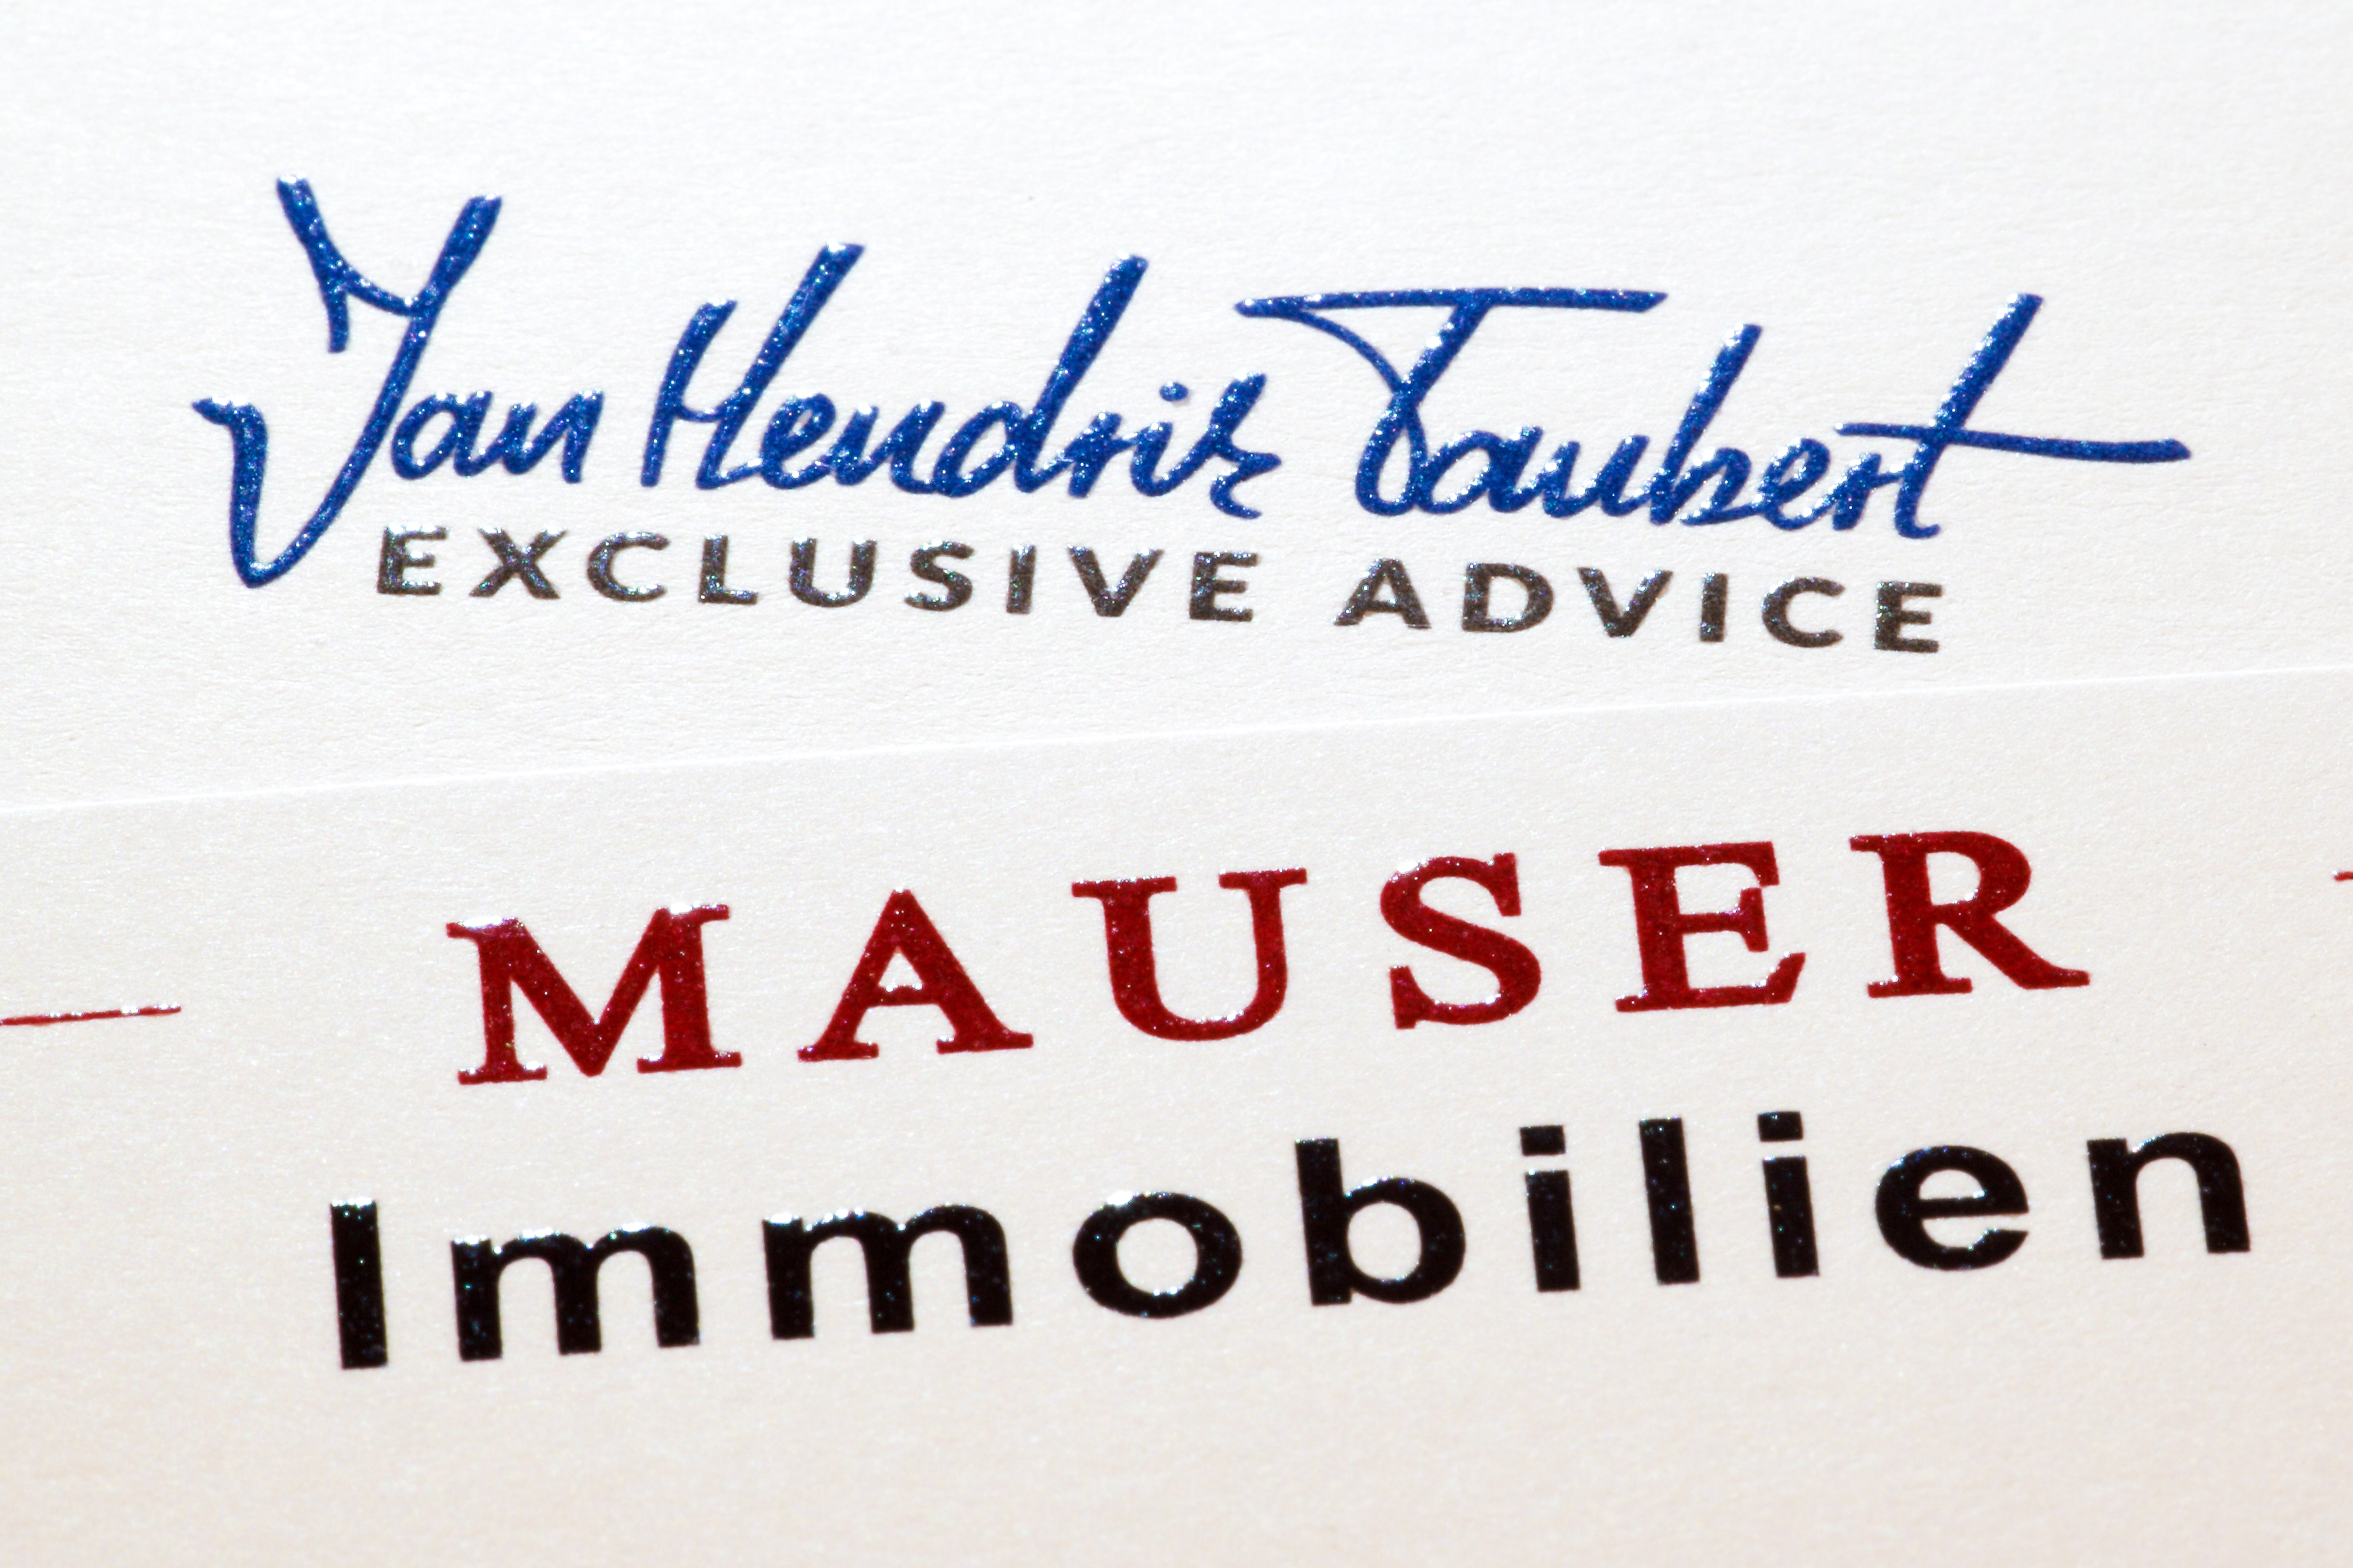 Relief printing_Mauser Immobilien